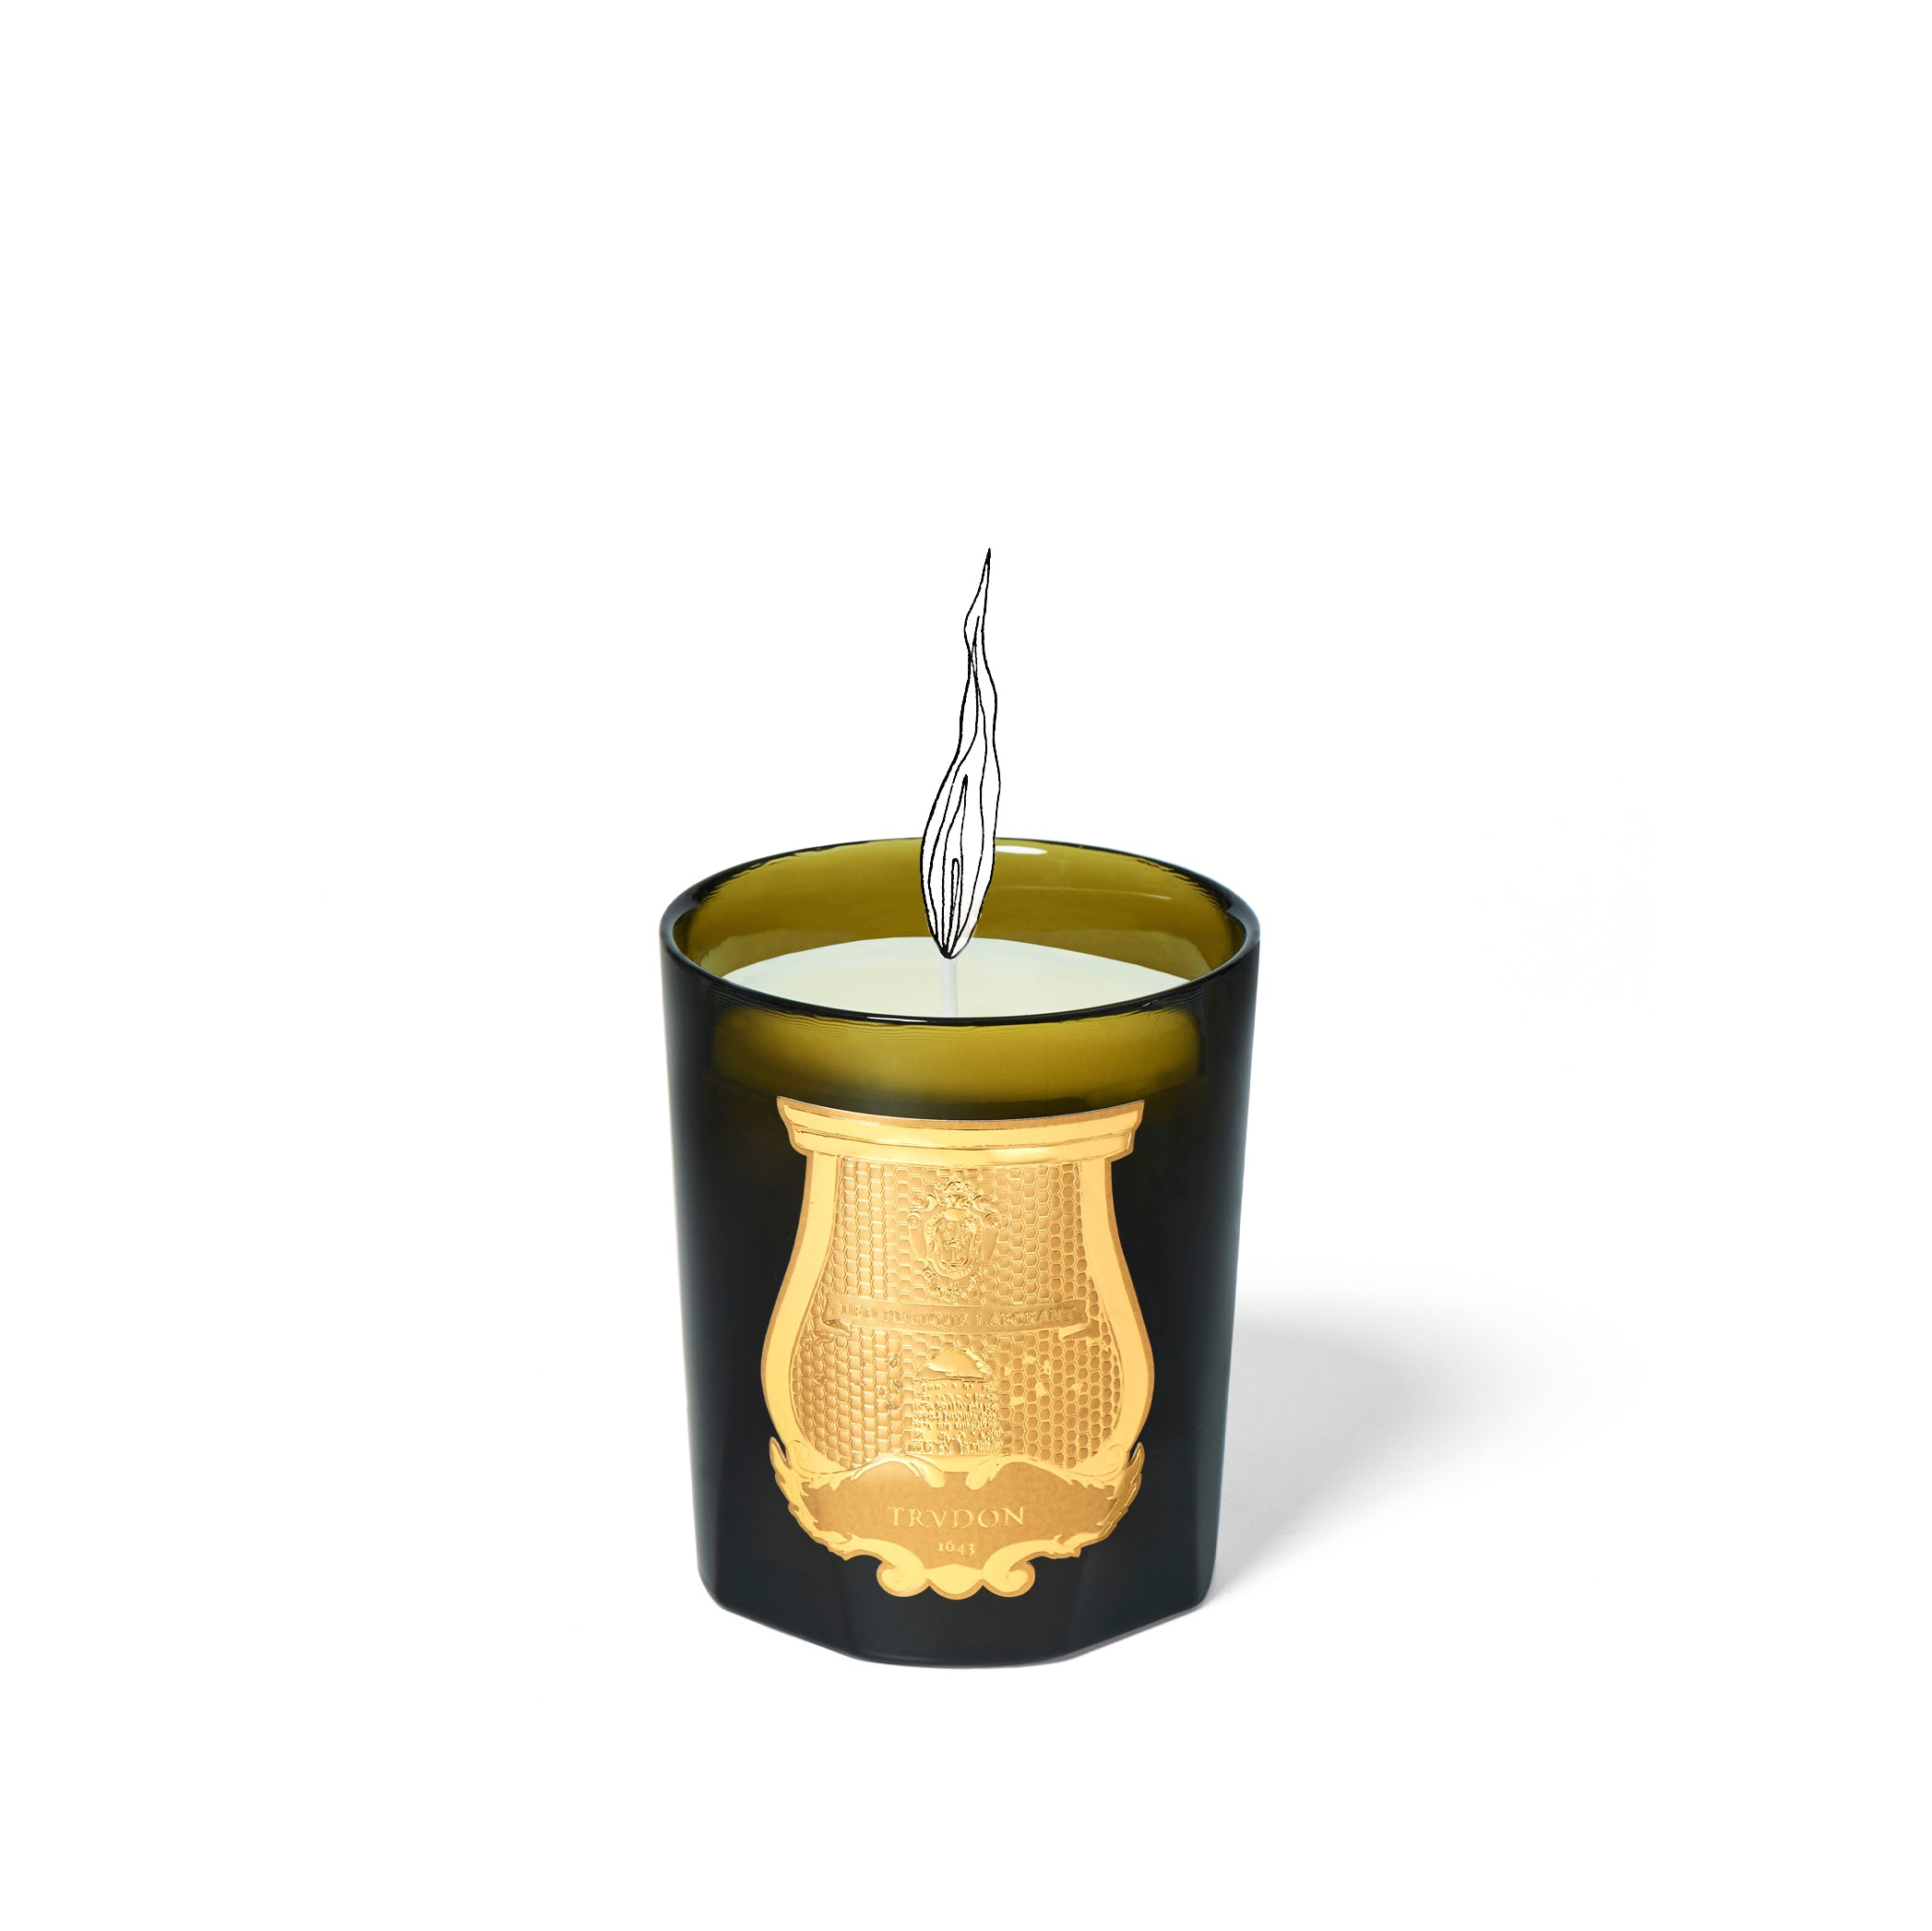 Classic Candle 'Ernesto' by Trudon, 270g